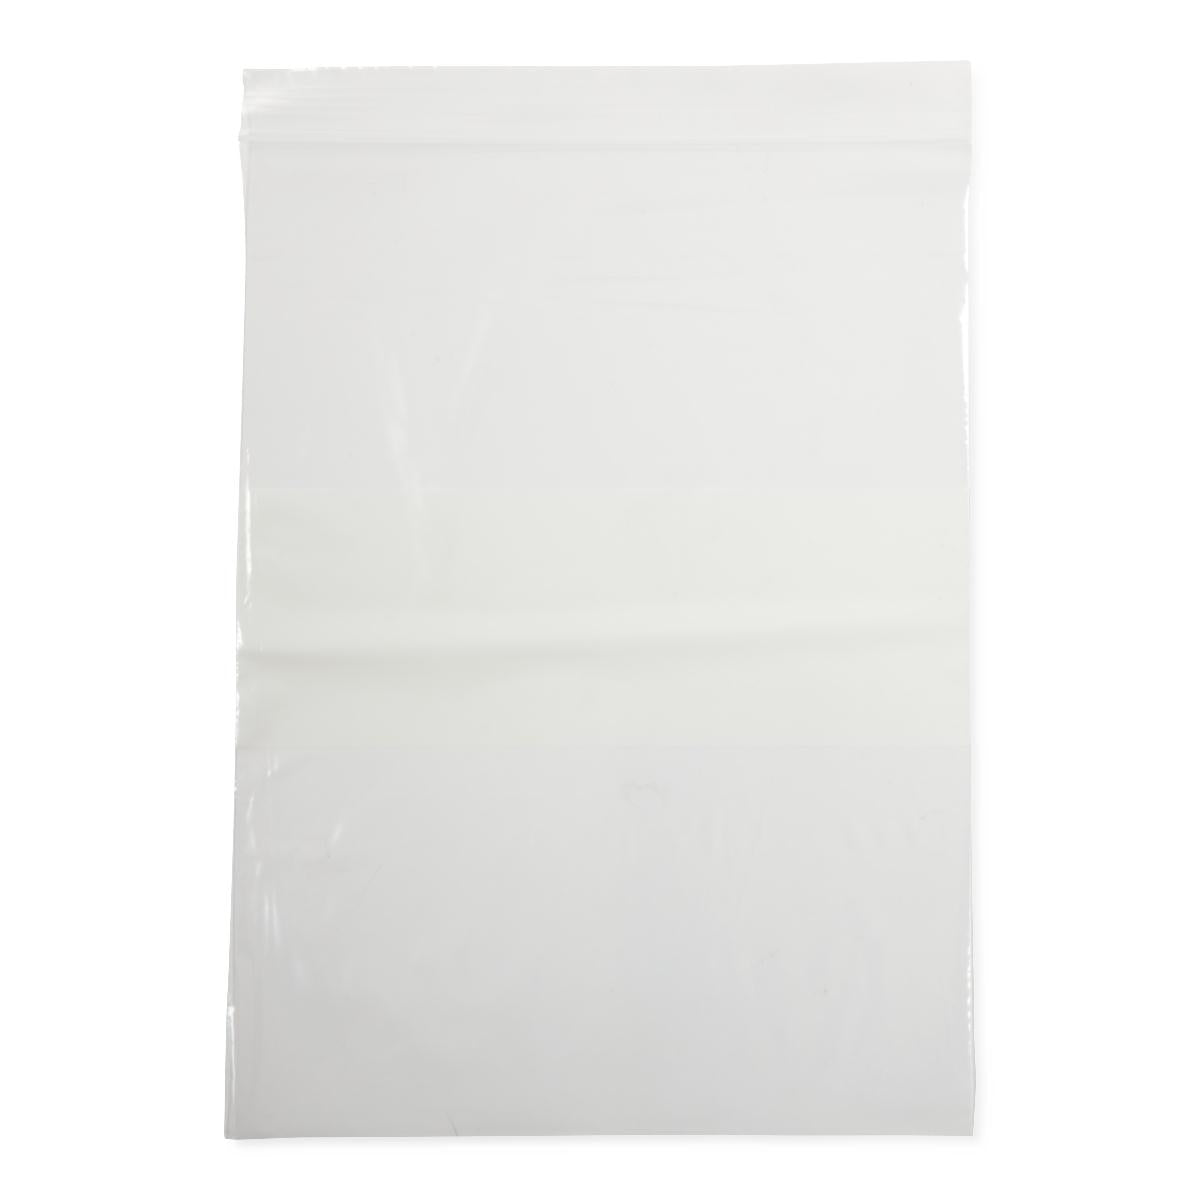 1000 Each-Case / Clear / 12.00000 IN Food Service Supplies - MEDLINE - Wasatch Medical Supply